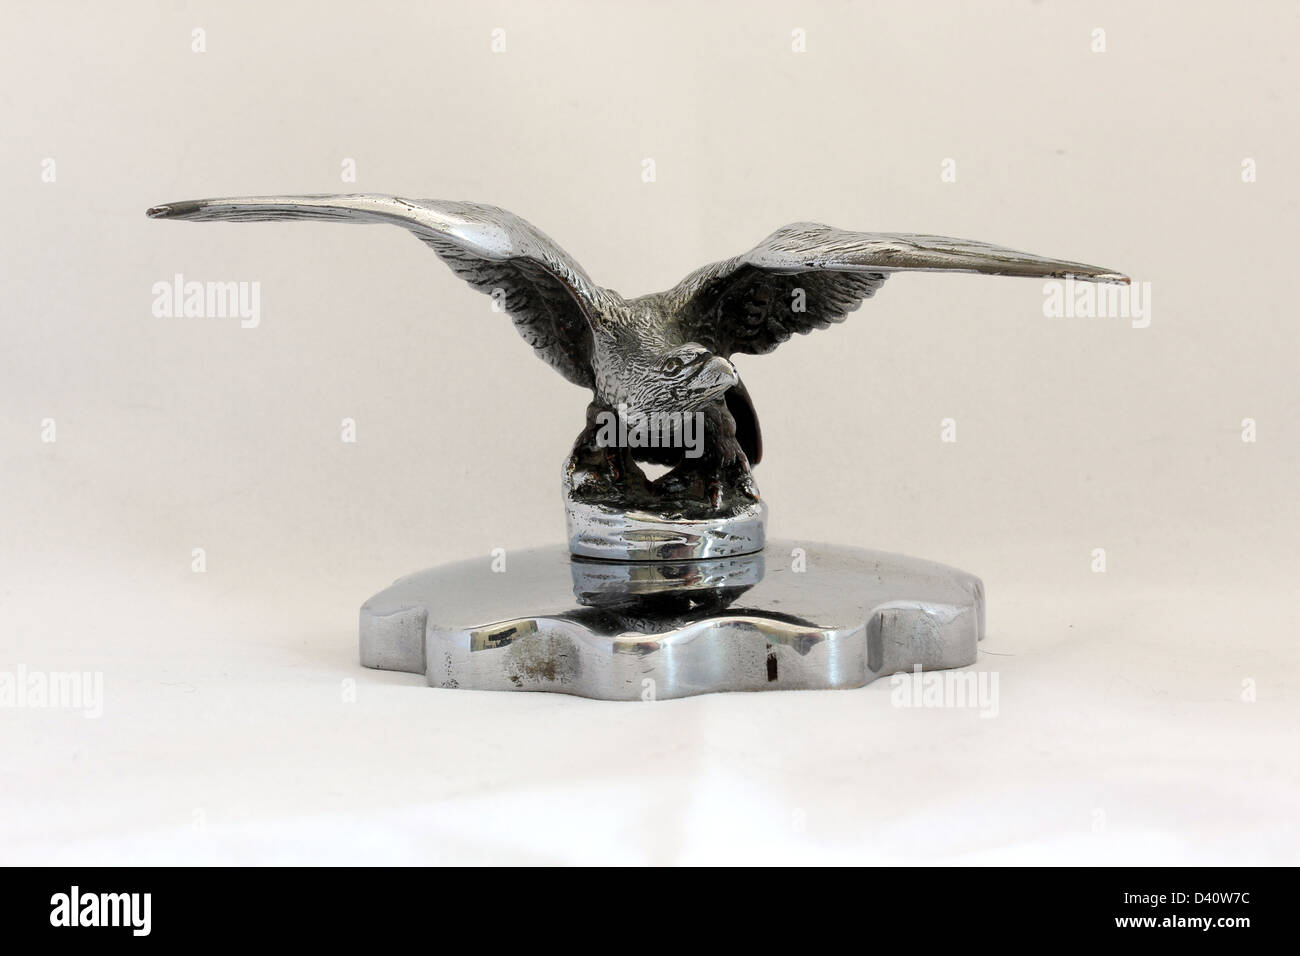 A petrol cap with eagle ornament from a 1935 Alvis Silver Eagle SG saloon car Stock Photo